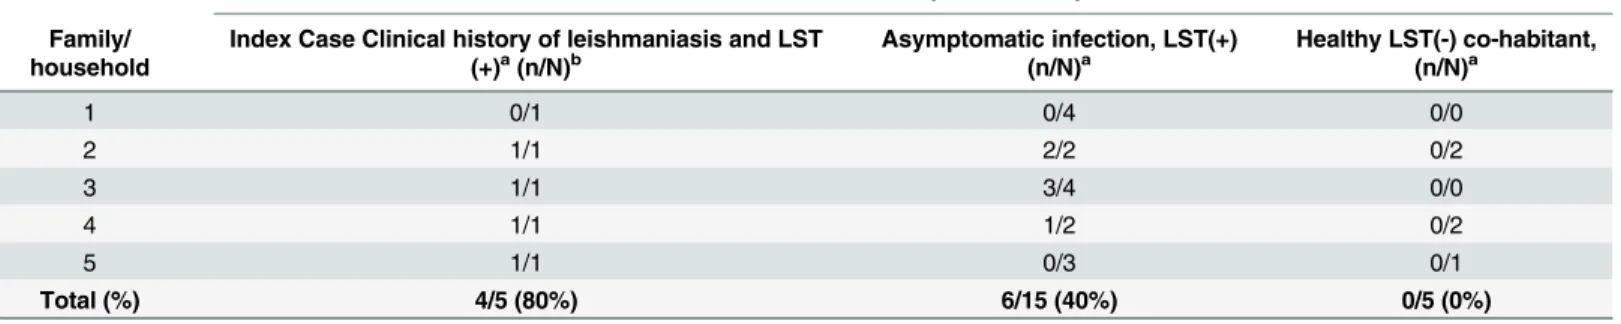 Table 1. Demonstration of feasibility of detecting asymptomatic infection among household members co-habitating with a prior symptomatic case using PCR-Southern blot of Leishmania kDNA (Phase1).